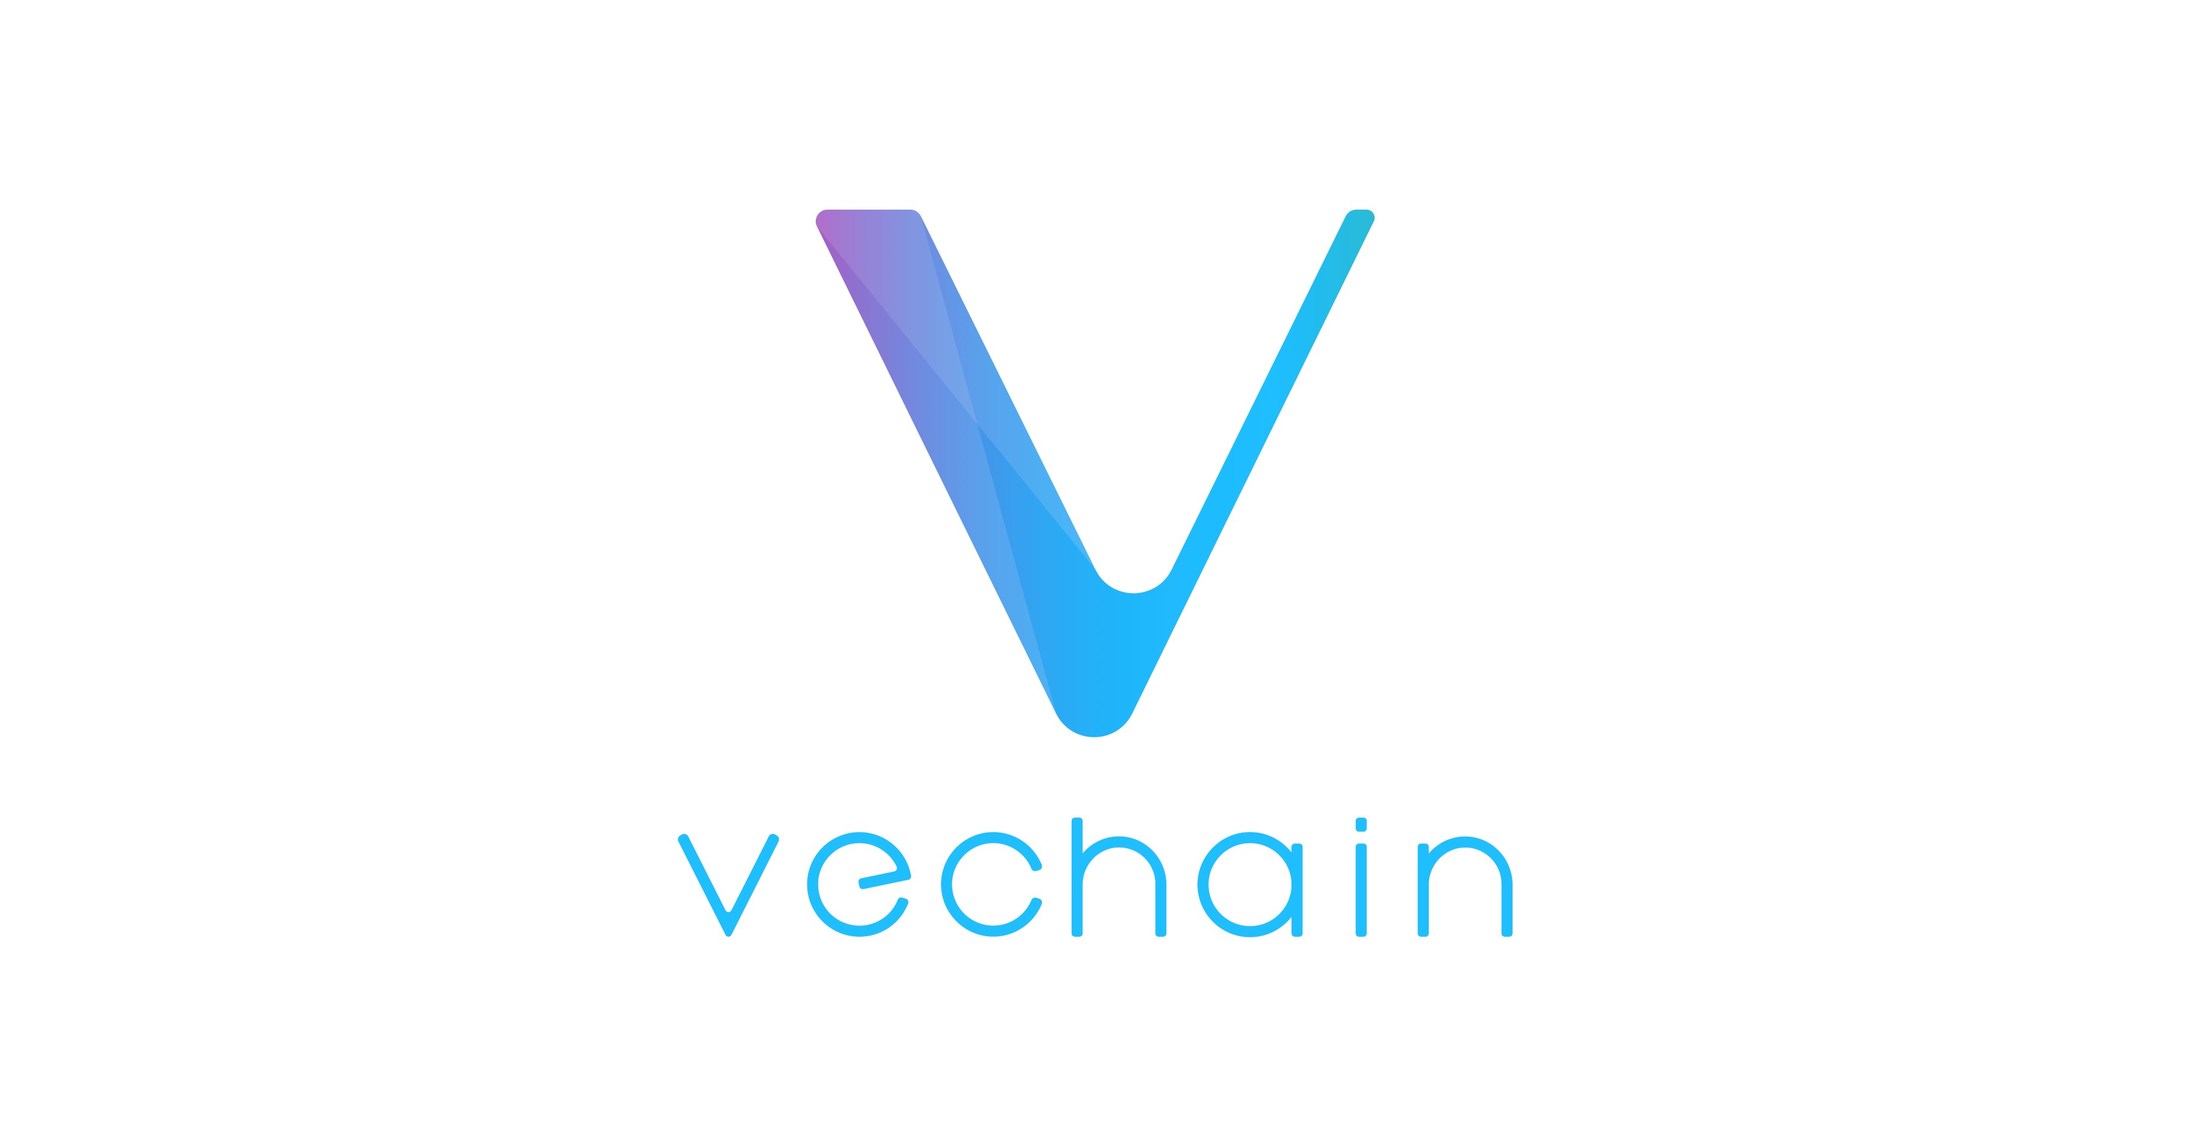 VeChain: How Much VET Do You Need to Make $1 Million At $2?